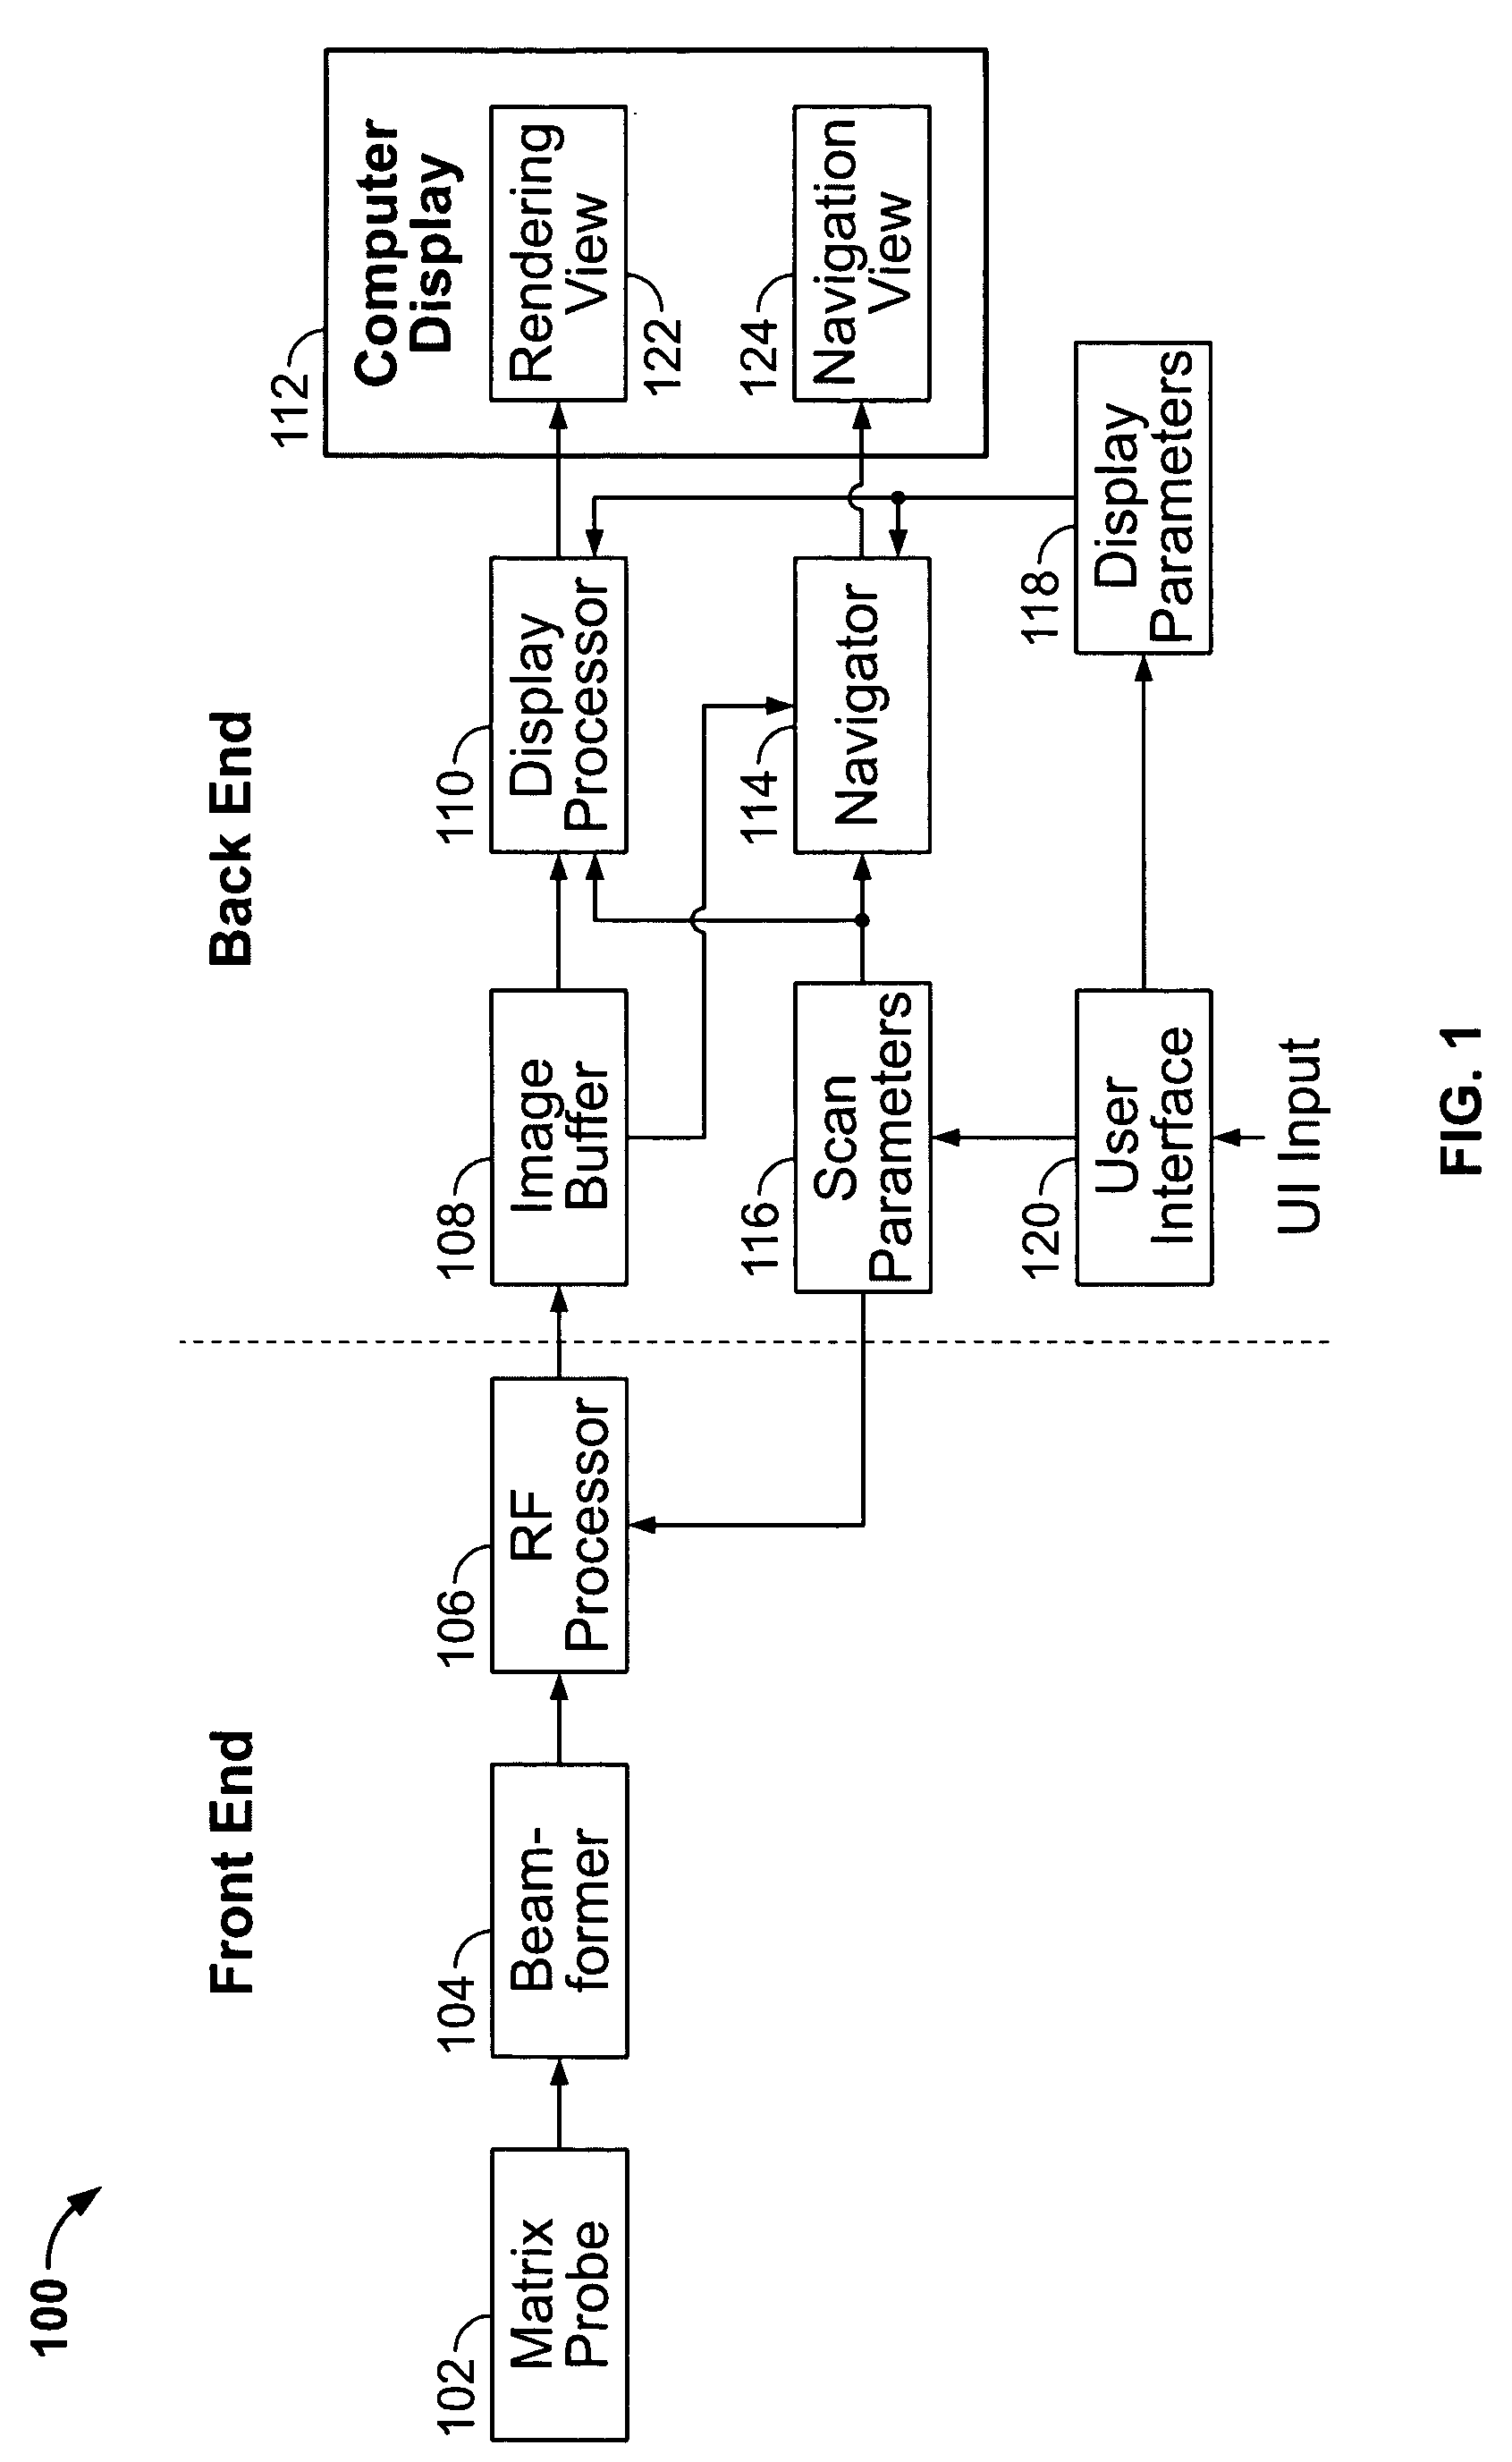 Method and apparatus for medical ultrasound navigation user interface